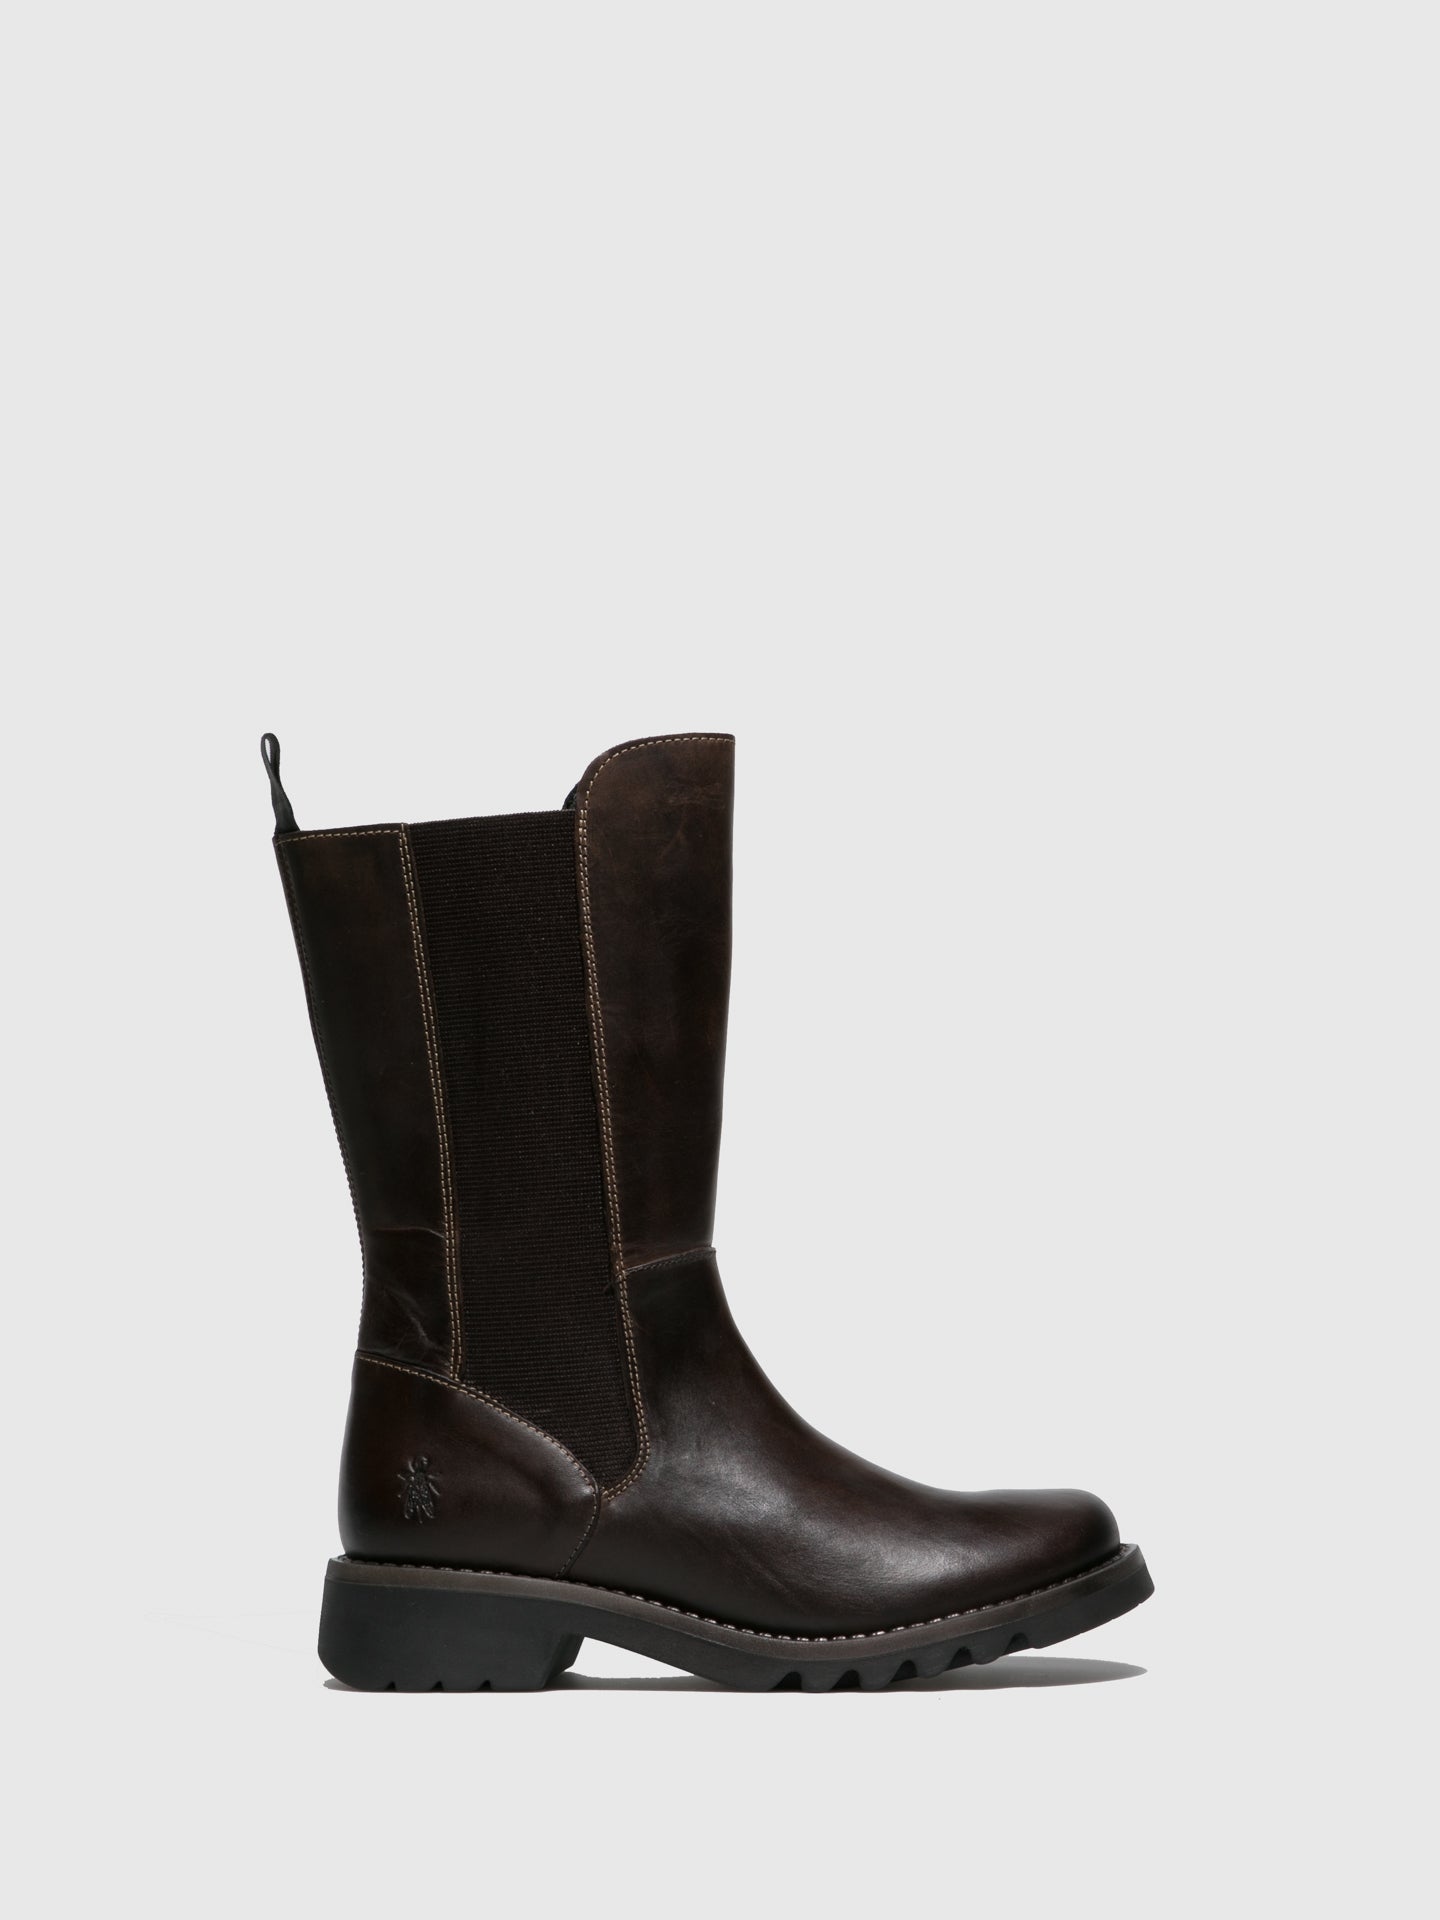 Fly London Chelsea Boots RELM641FLY RUG DK.BROWN